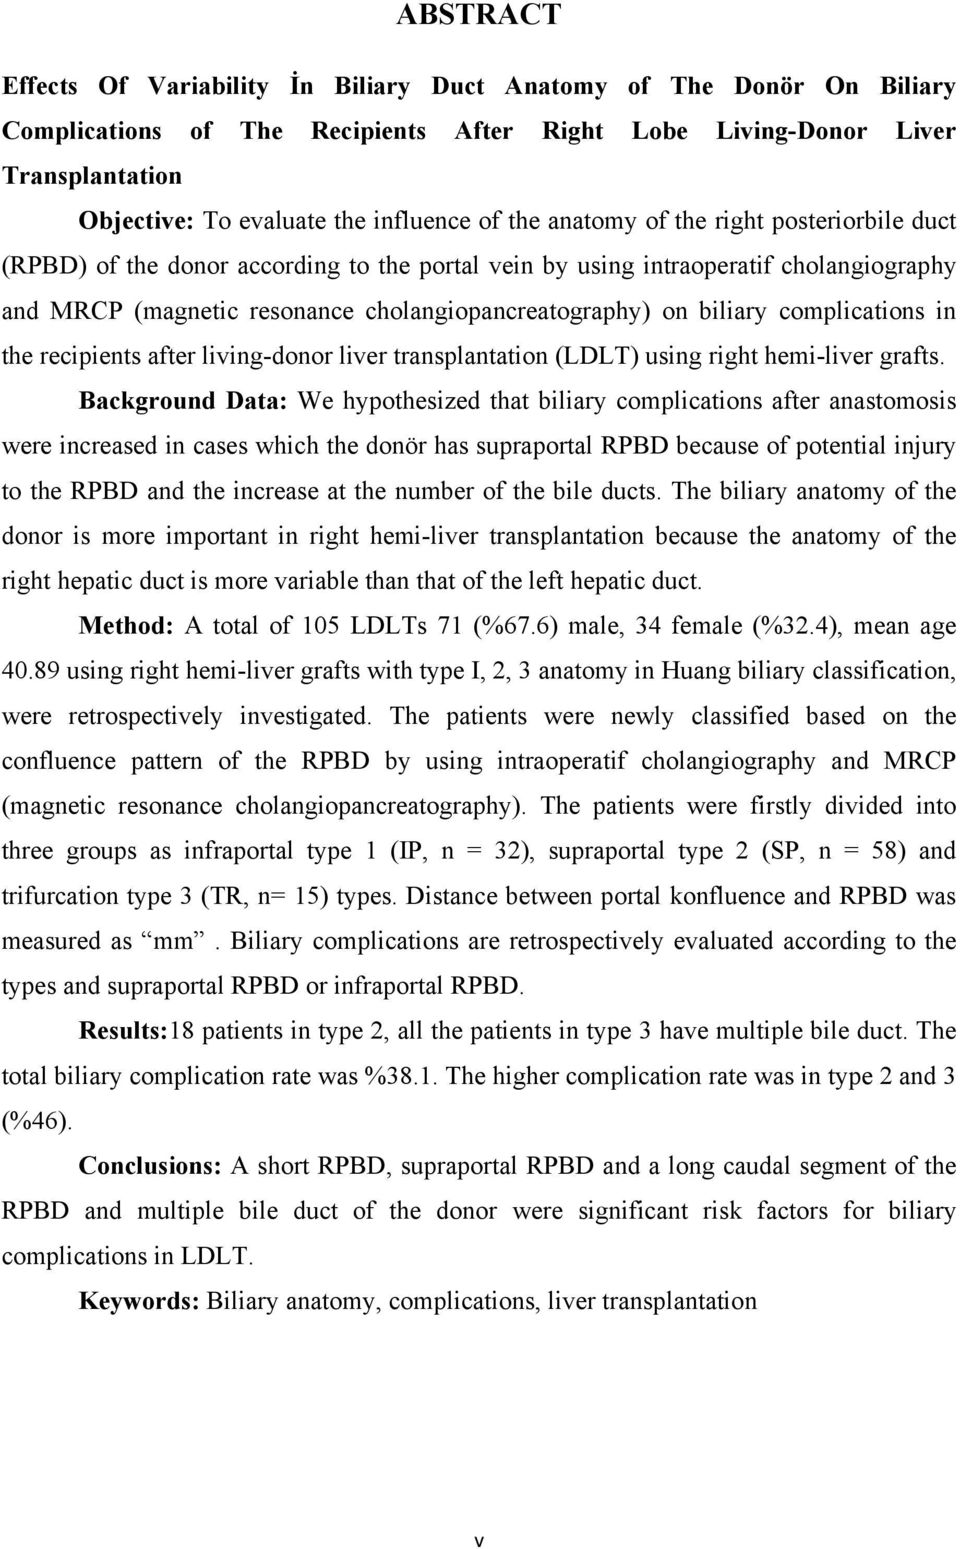 on biliary complications in the recipients after living-donor liver transplantation (LDLT) using right hemi-liver grafts.